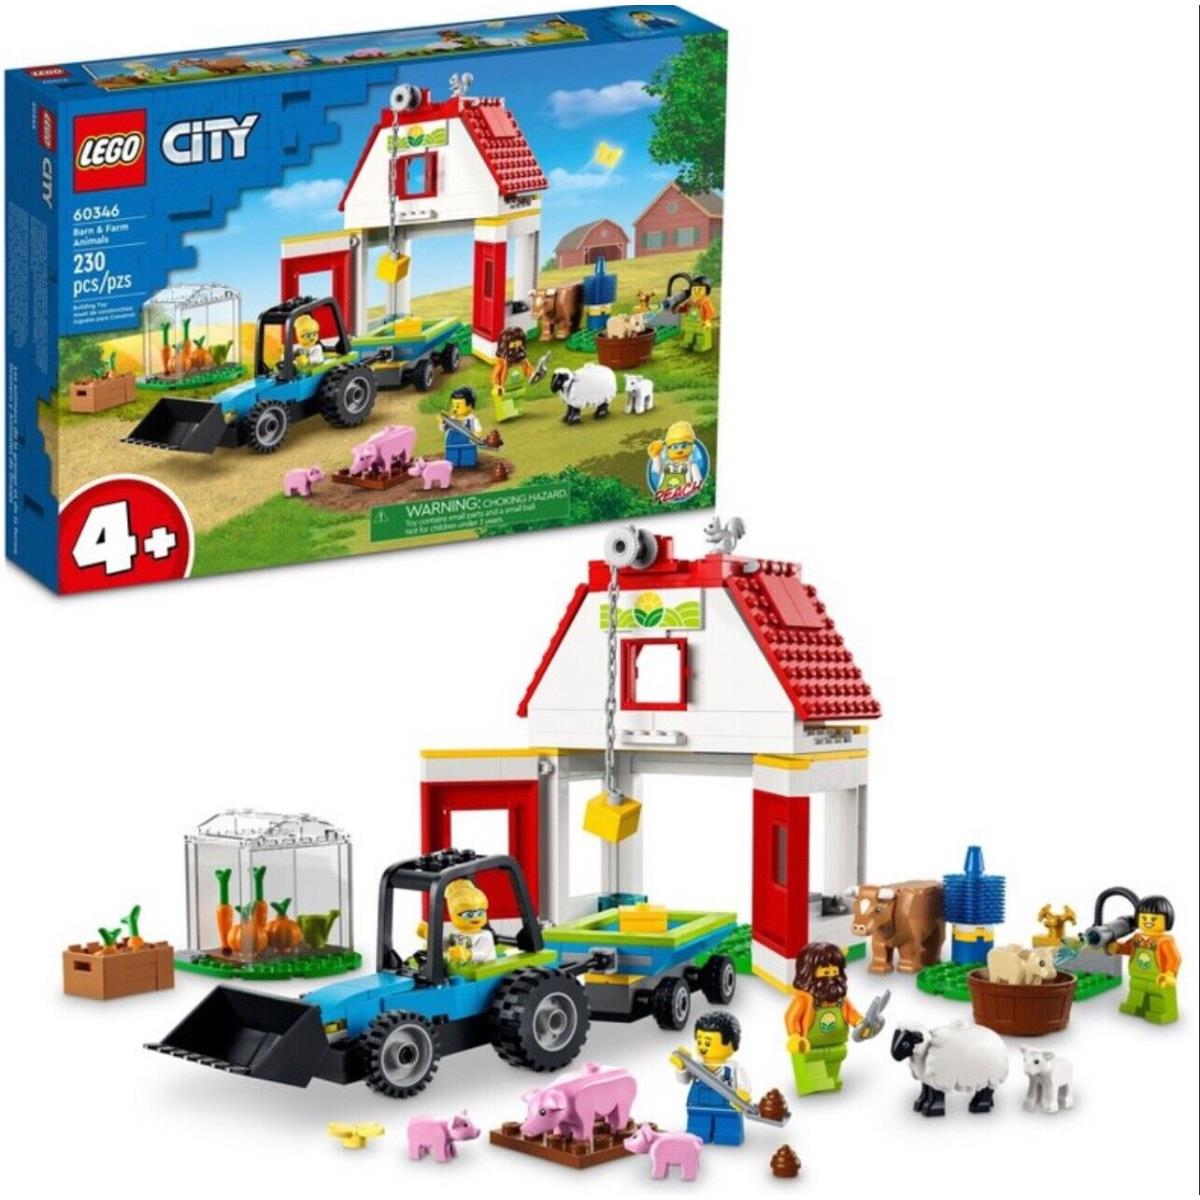 Lego City Barn Farm Animals 60346 Building Set Tractor Greenhouse and More